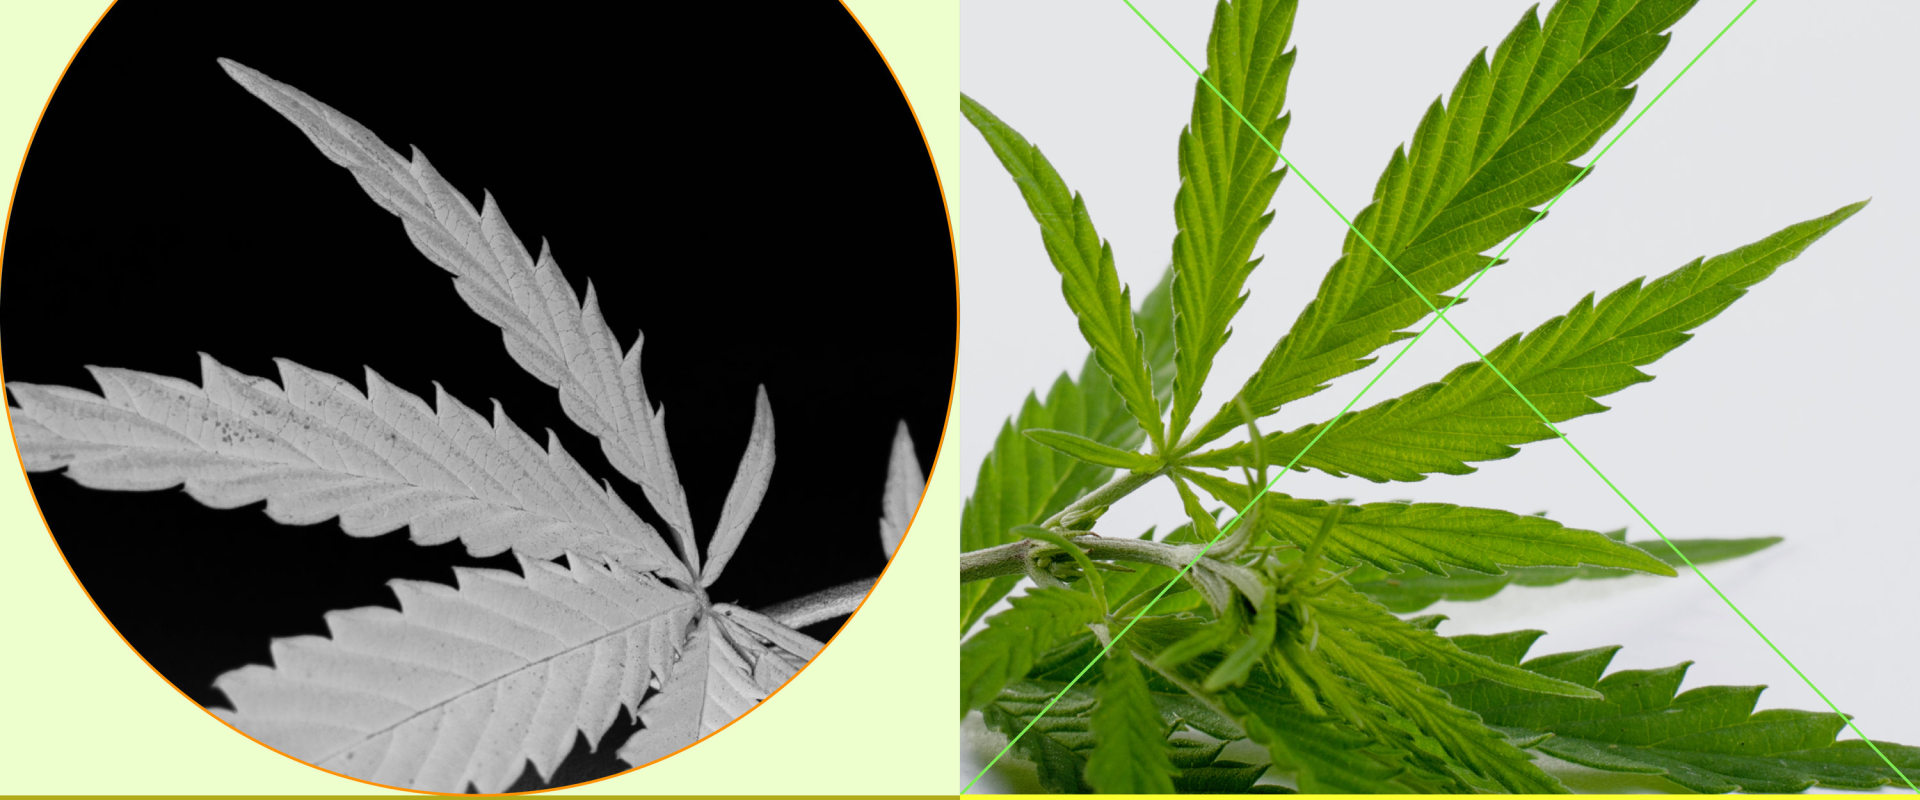 Which is Better for Pain Relief: Hemp or CBD?